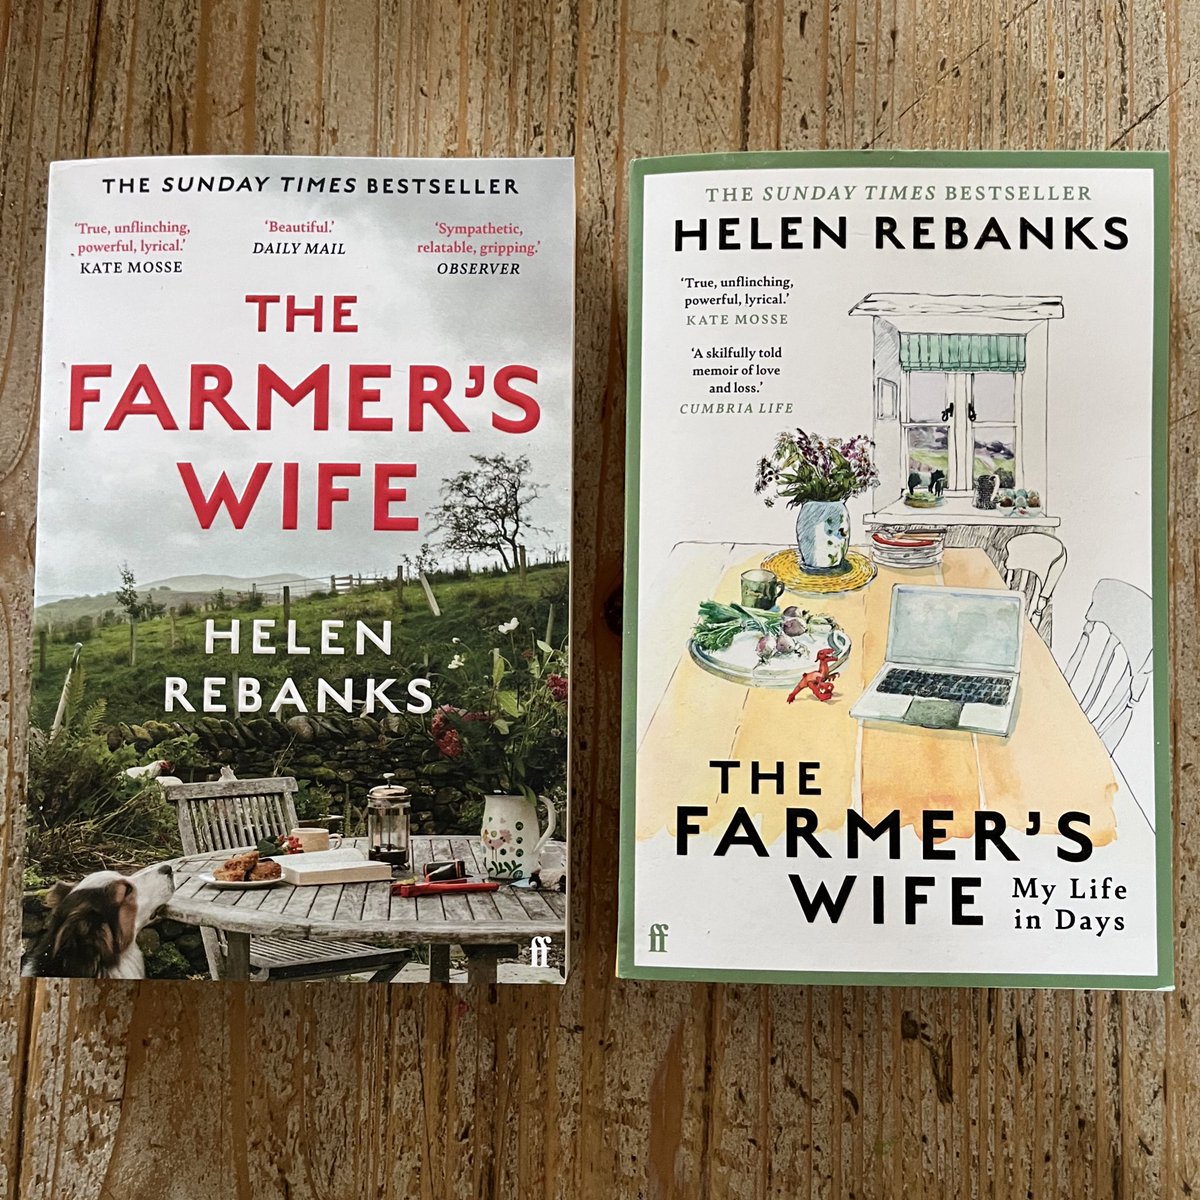 It’s nearly paperback time!! Out 29th February - left is main UK edition, right is regional /limited Cumbrian edition - thank you @FaberBooks they are gorgeous! Pre-order from your indie bookshop to avoid disappointment🏃‍♀️🏃‍♀️🏃‍♀️